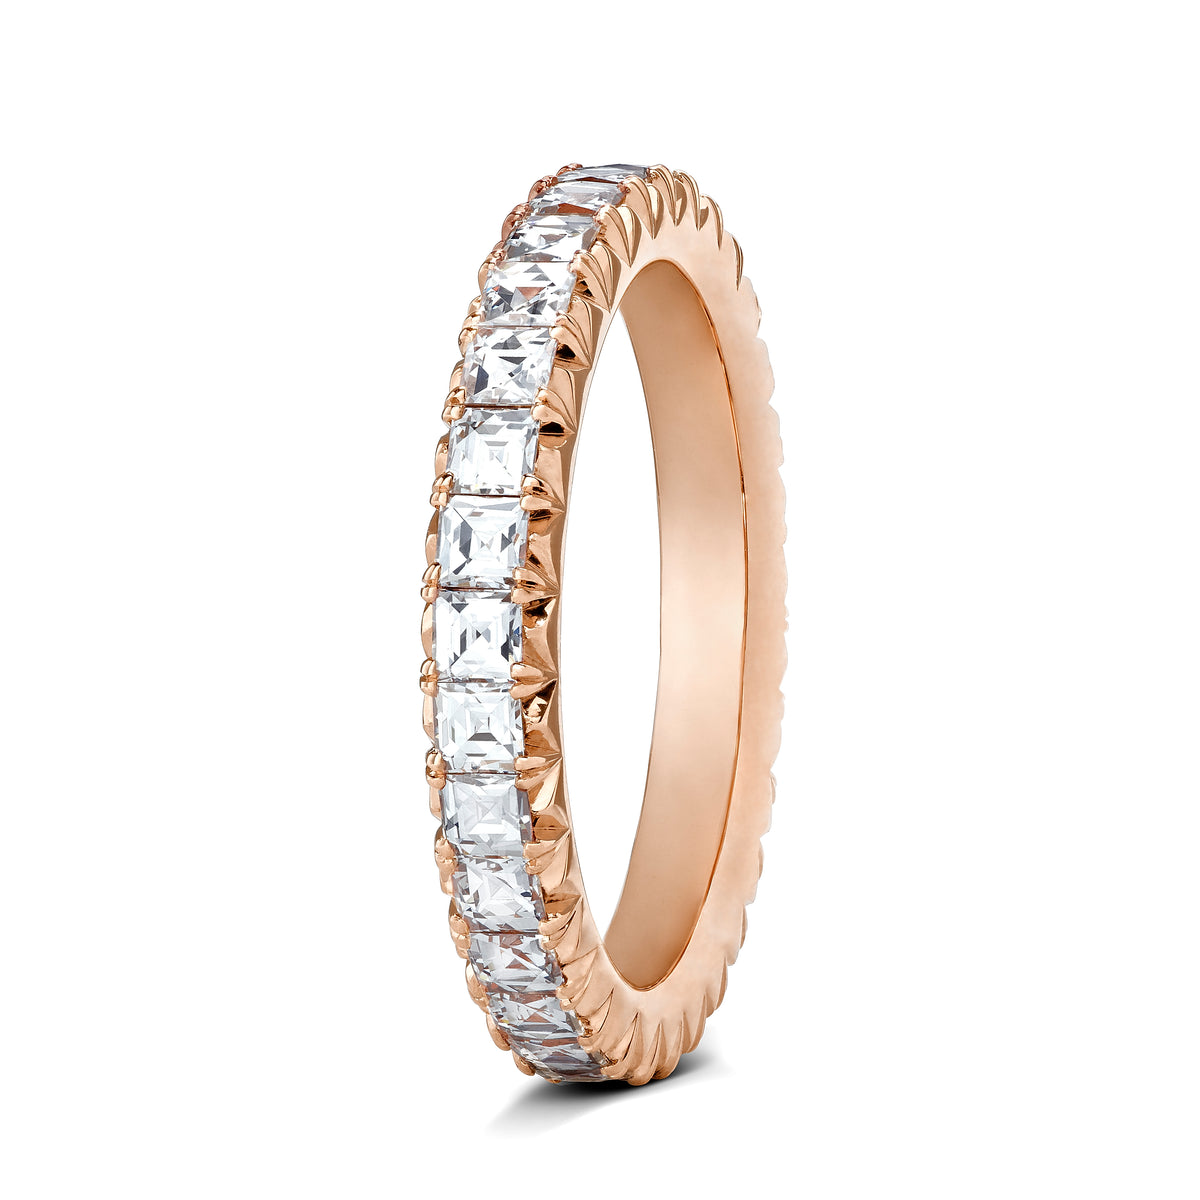 LIV II ROSE GOLD AND DIAMOND ETERNITY RING